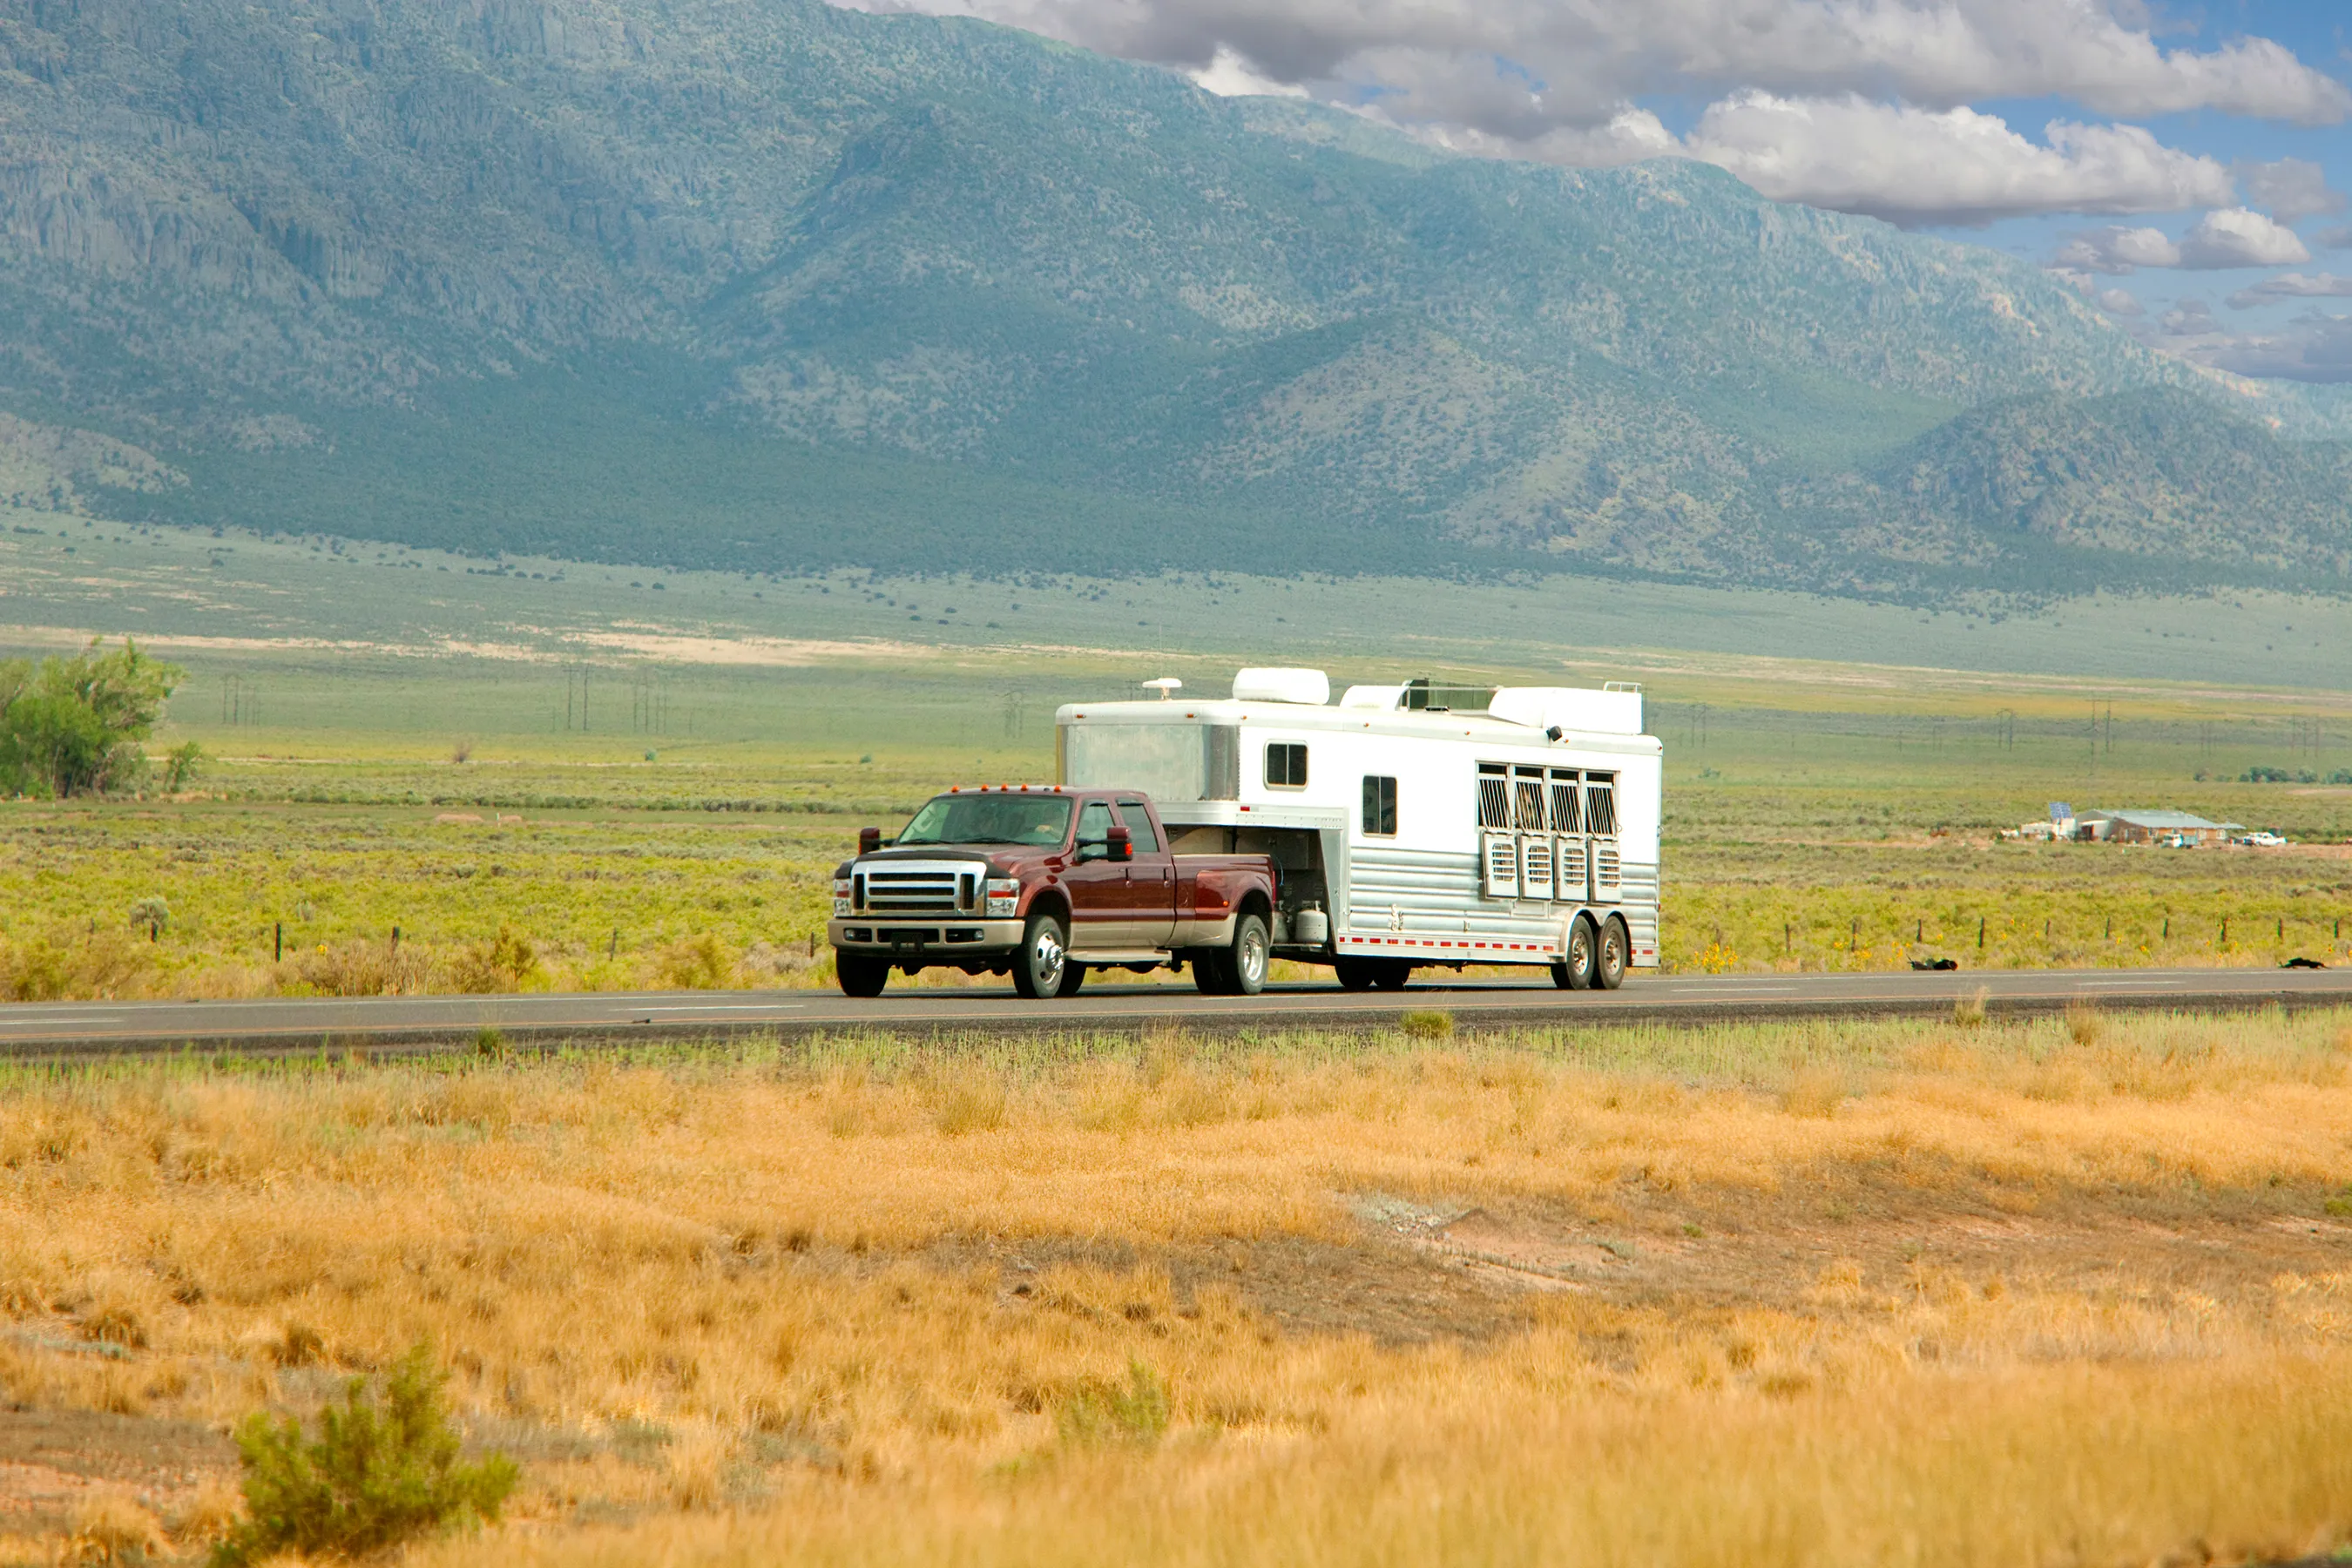 do you need insurance for a travel trailer in california - Insurance Requirements in California